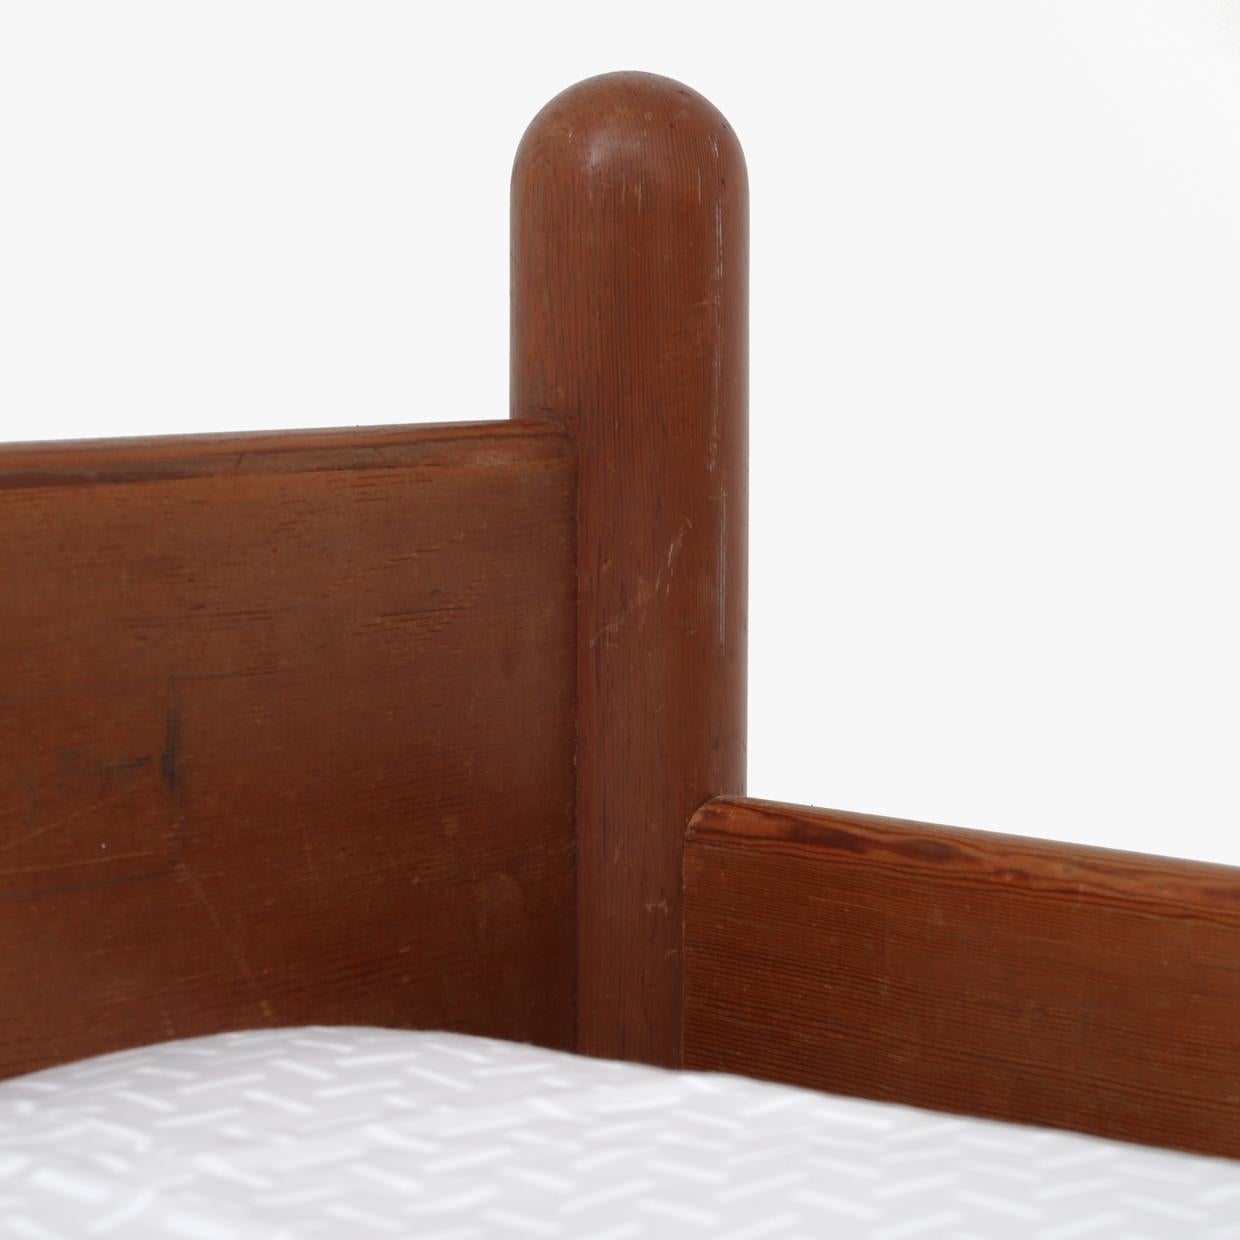 Rare children's bed in solid patinated Oregon pine from 1935. By Flemming Lassen and Erhard Rasmussen.